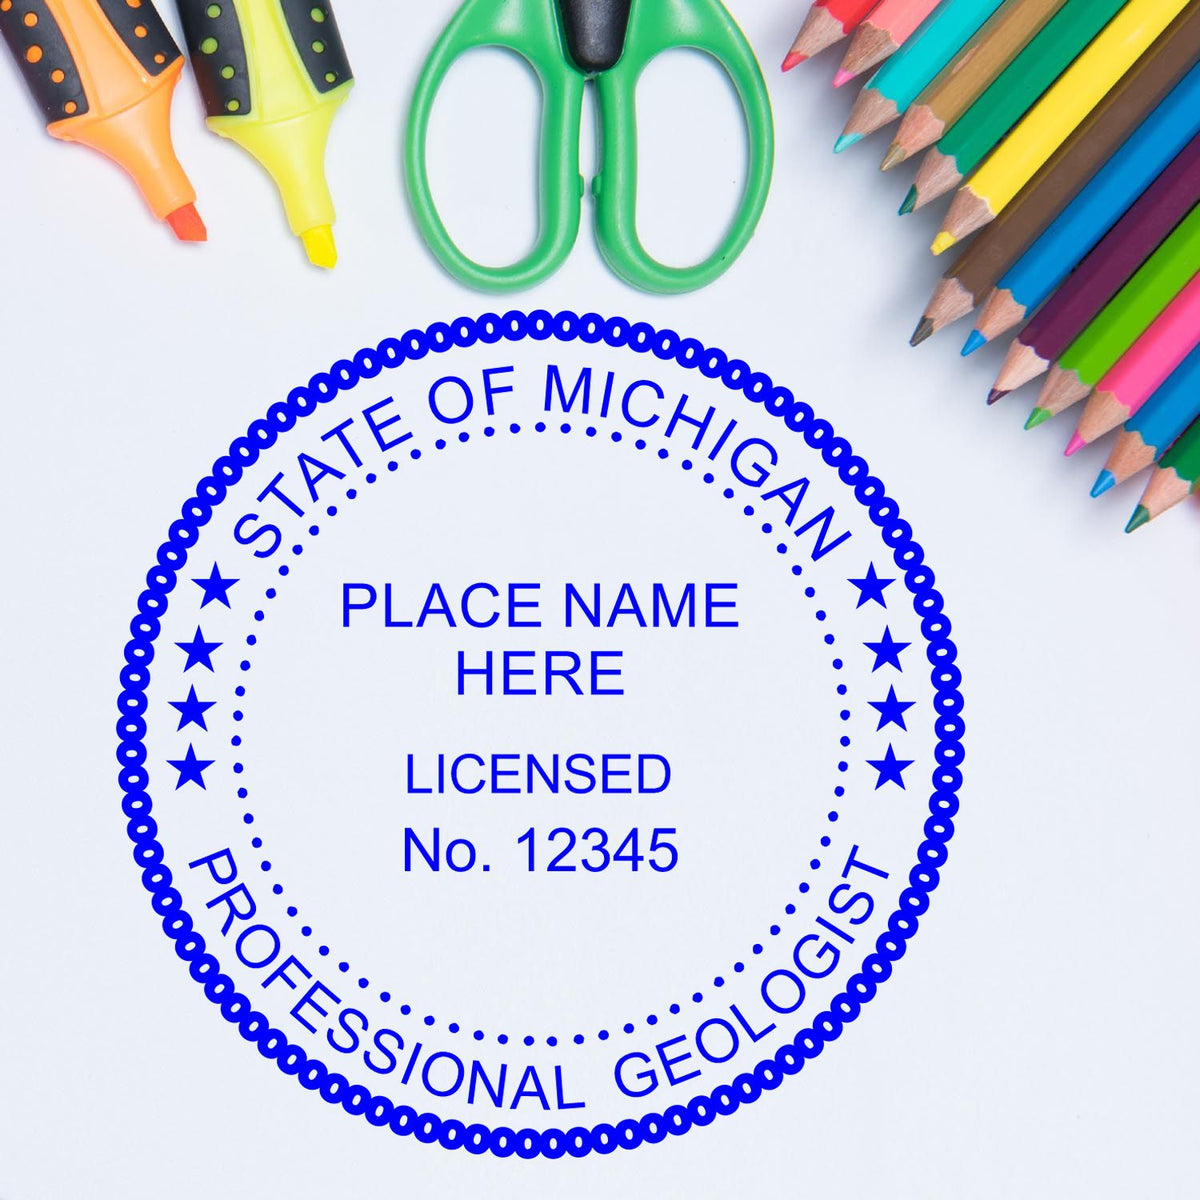 The Slim Pre-Inked Michigan Professional Geologist Seal Stamp stamp impression comes to life with a crisp, detailed image stamped on paper - showcasing true professional quality.